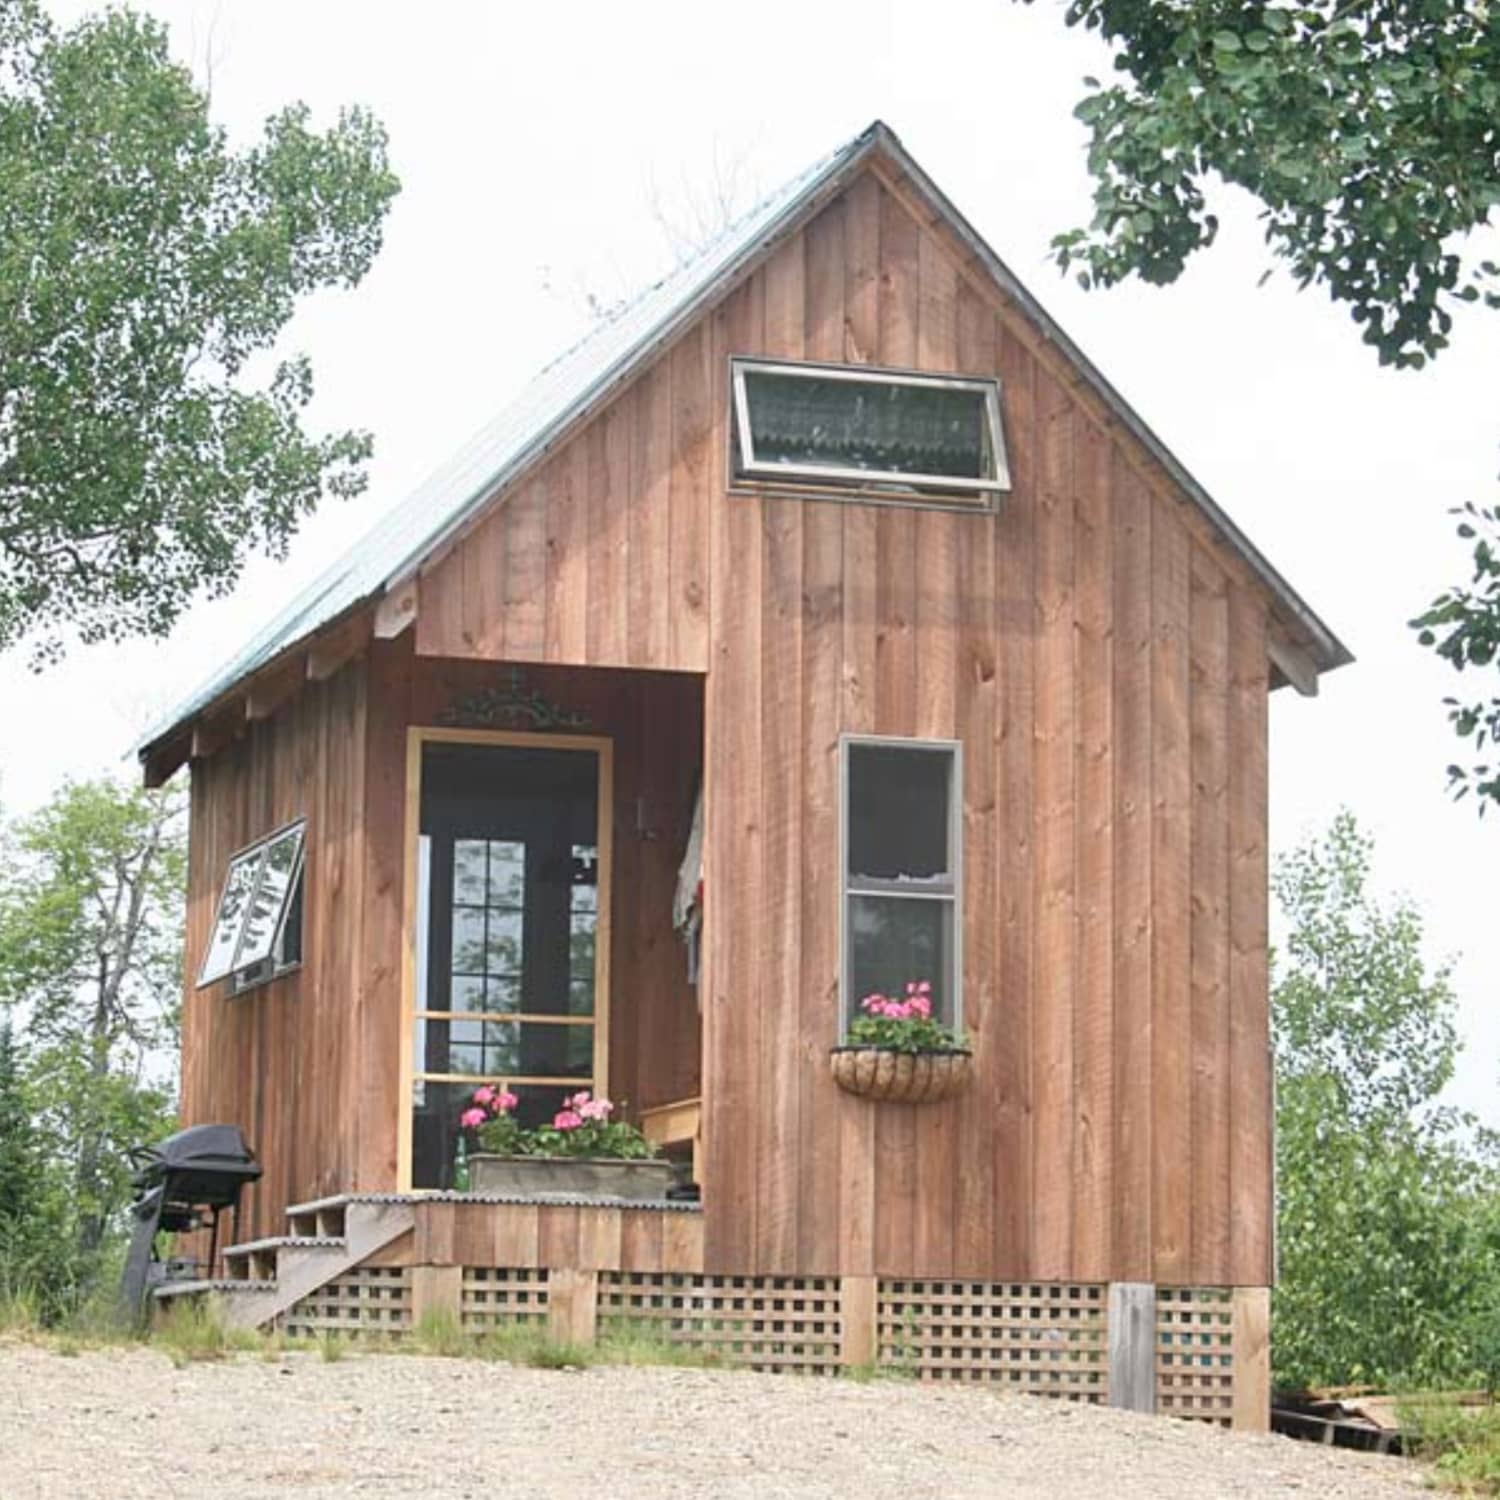 Tiny Homes are for Sale near me, but is it a Good Idea to Buy a